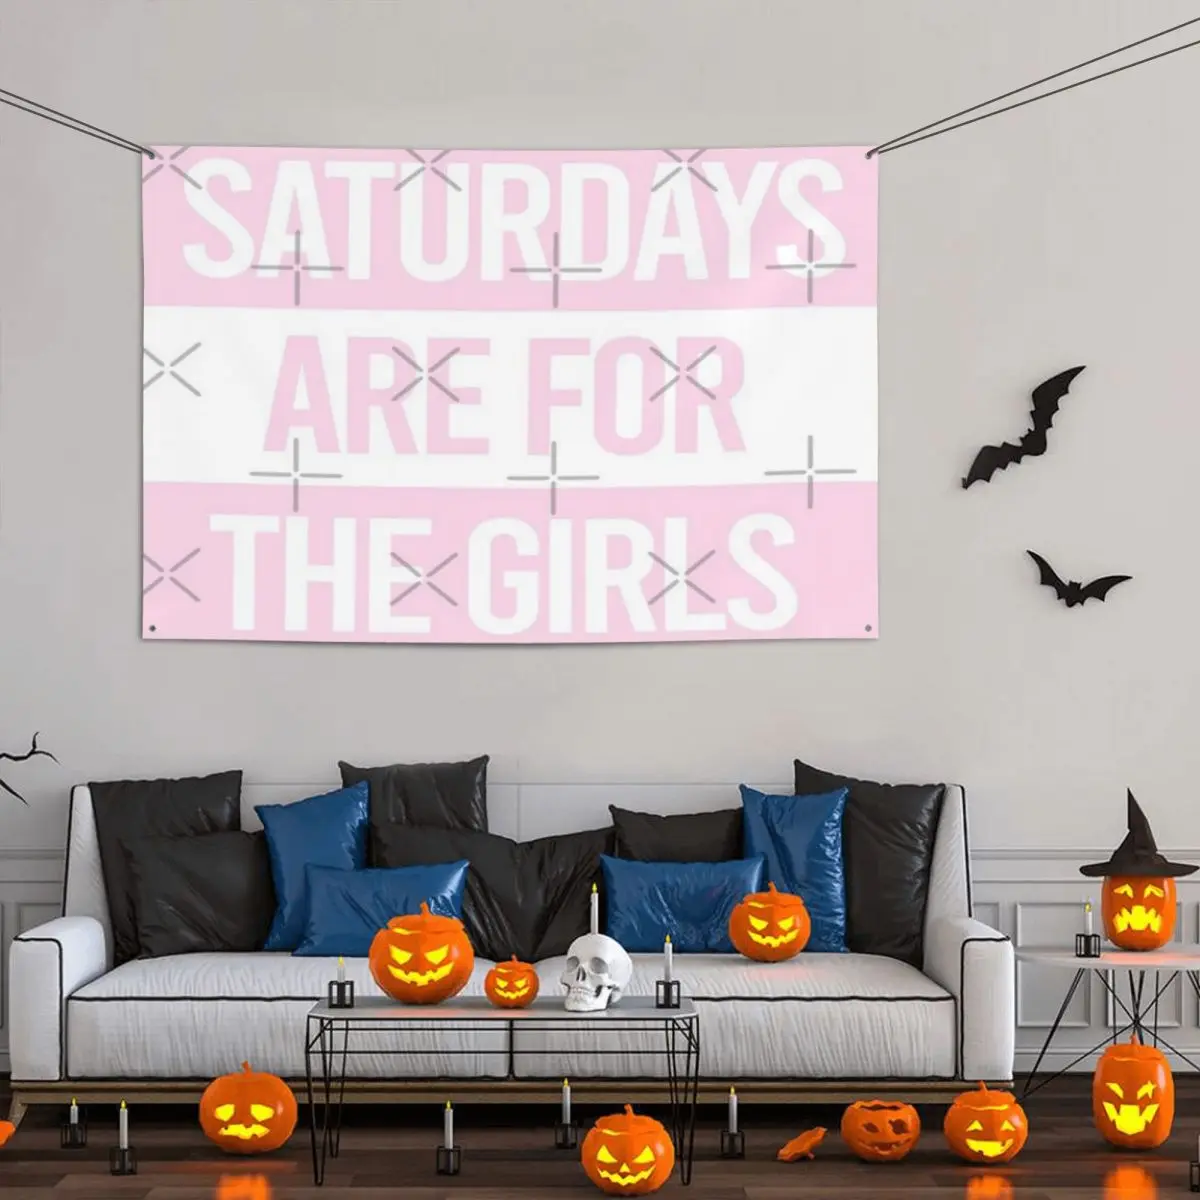 

Saturdays Are For The Girls Pink Party Banner Decor 120x180cm Polyester Material With Metal Grommets Fade Resistant Drapey